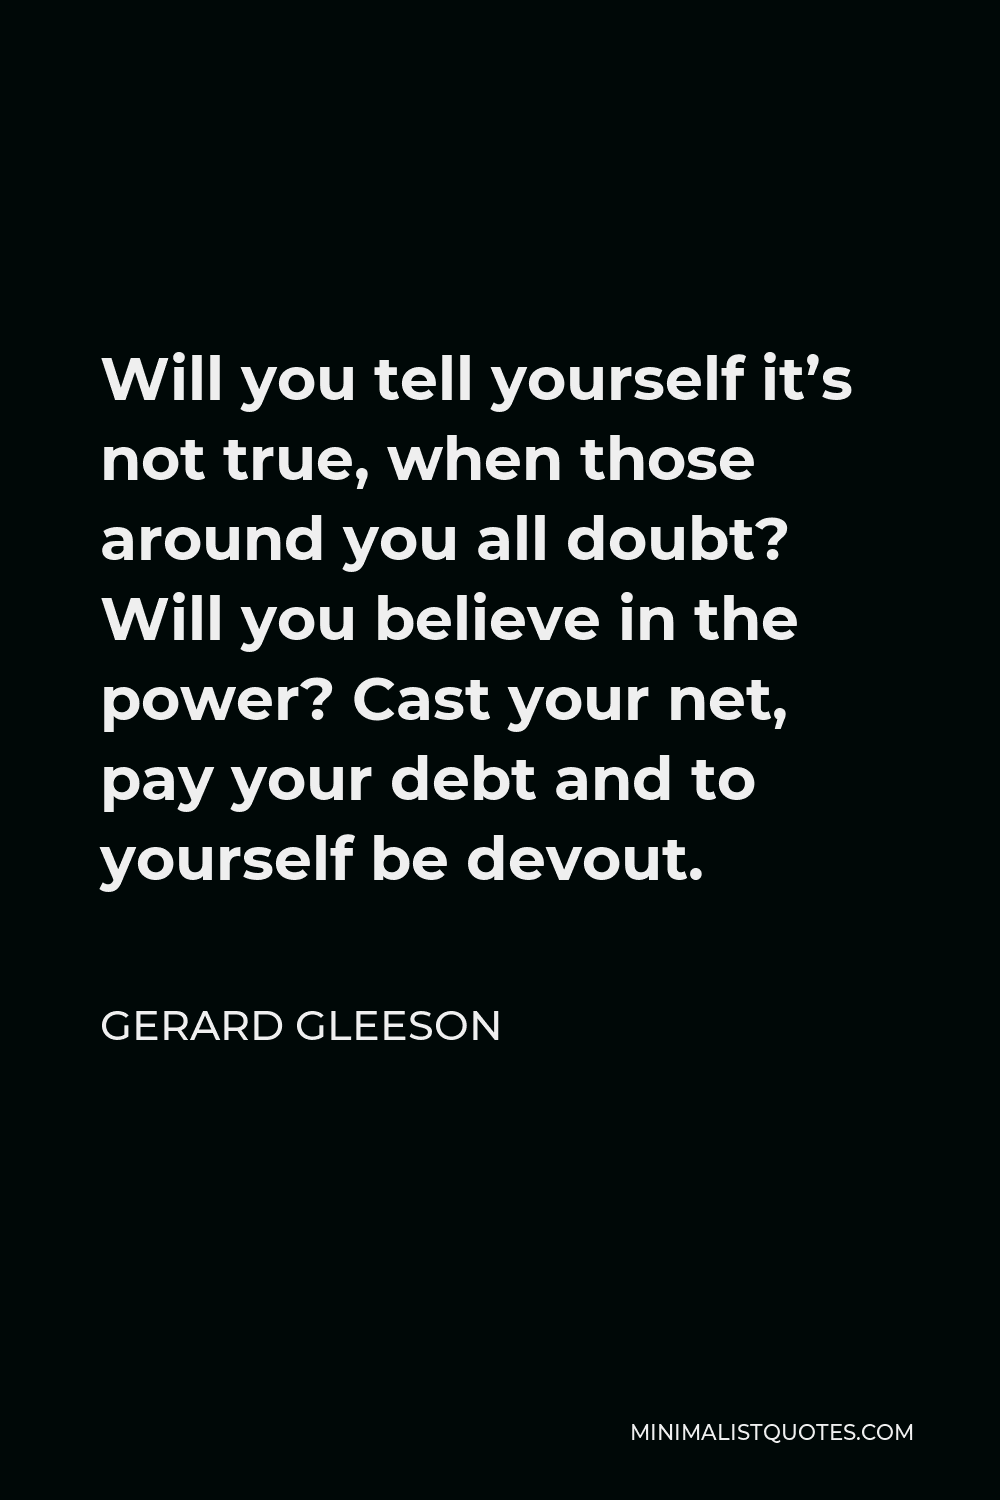 Gerard Gleeson Quote - Will you tell yourself it’s not true, when those around you all doubt? Will you believe in the power? Cast your net, pay your debt and to yourself be devout.